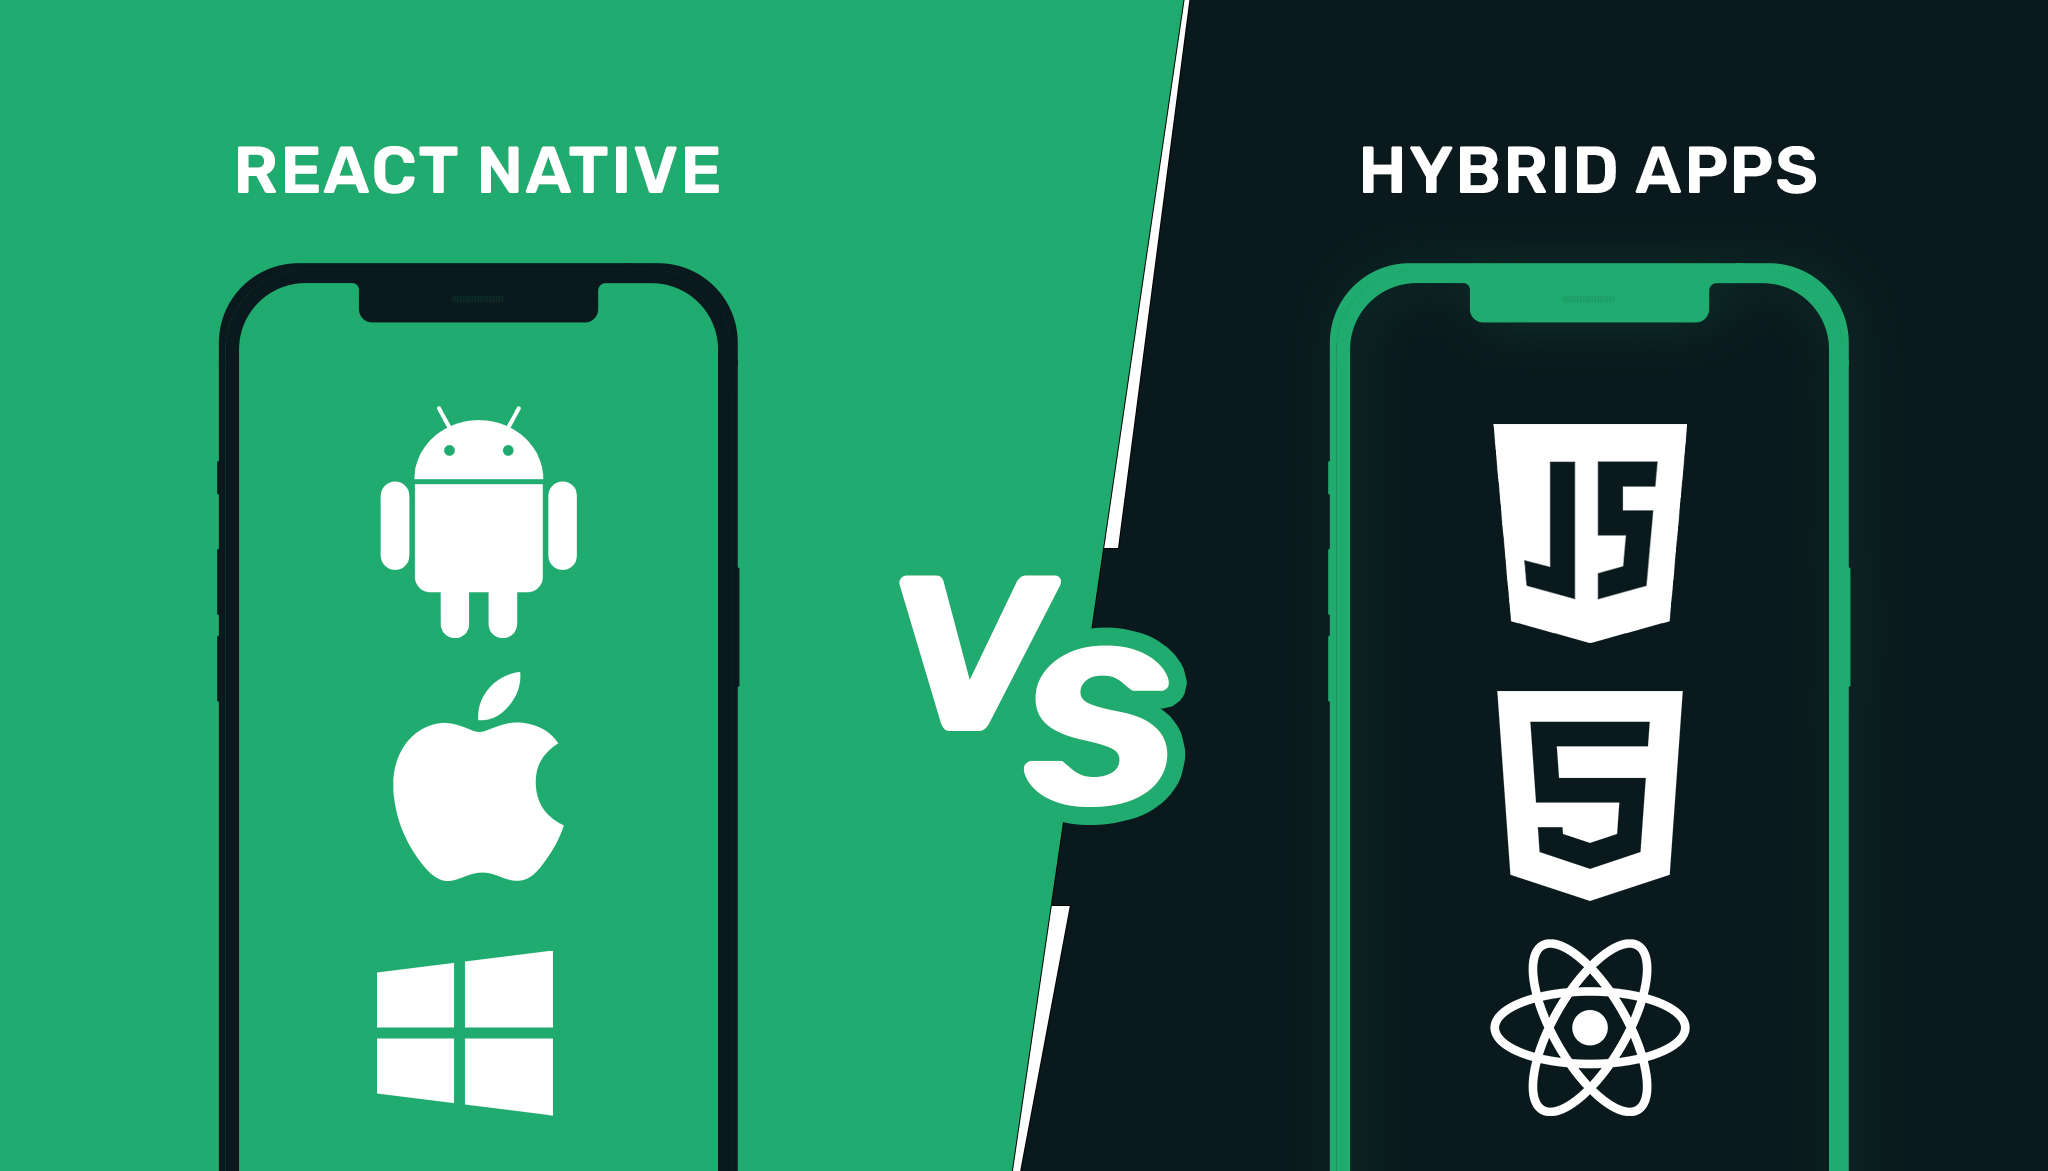 React Native vs Hybrid Apps - All You Need To Know